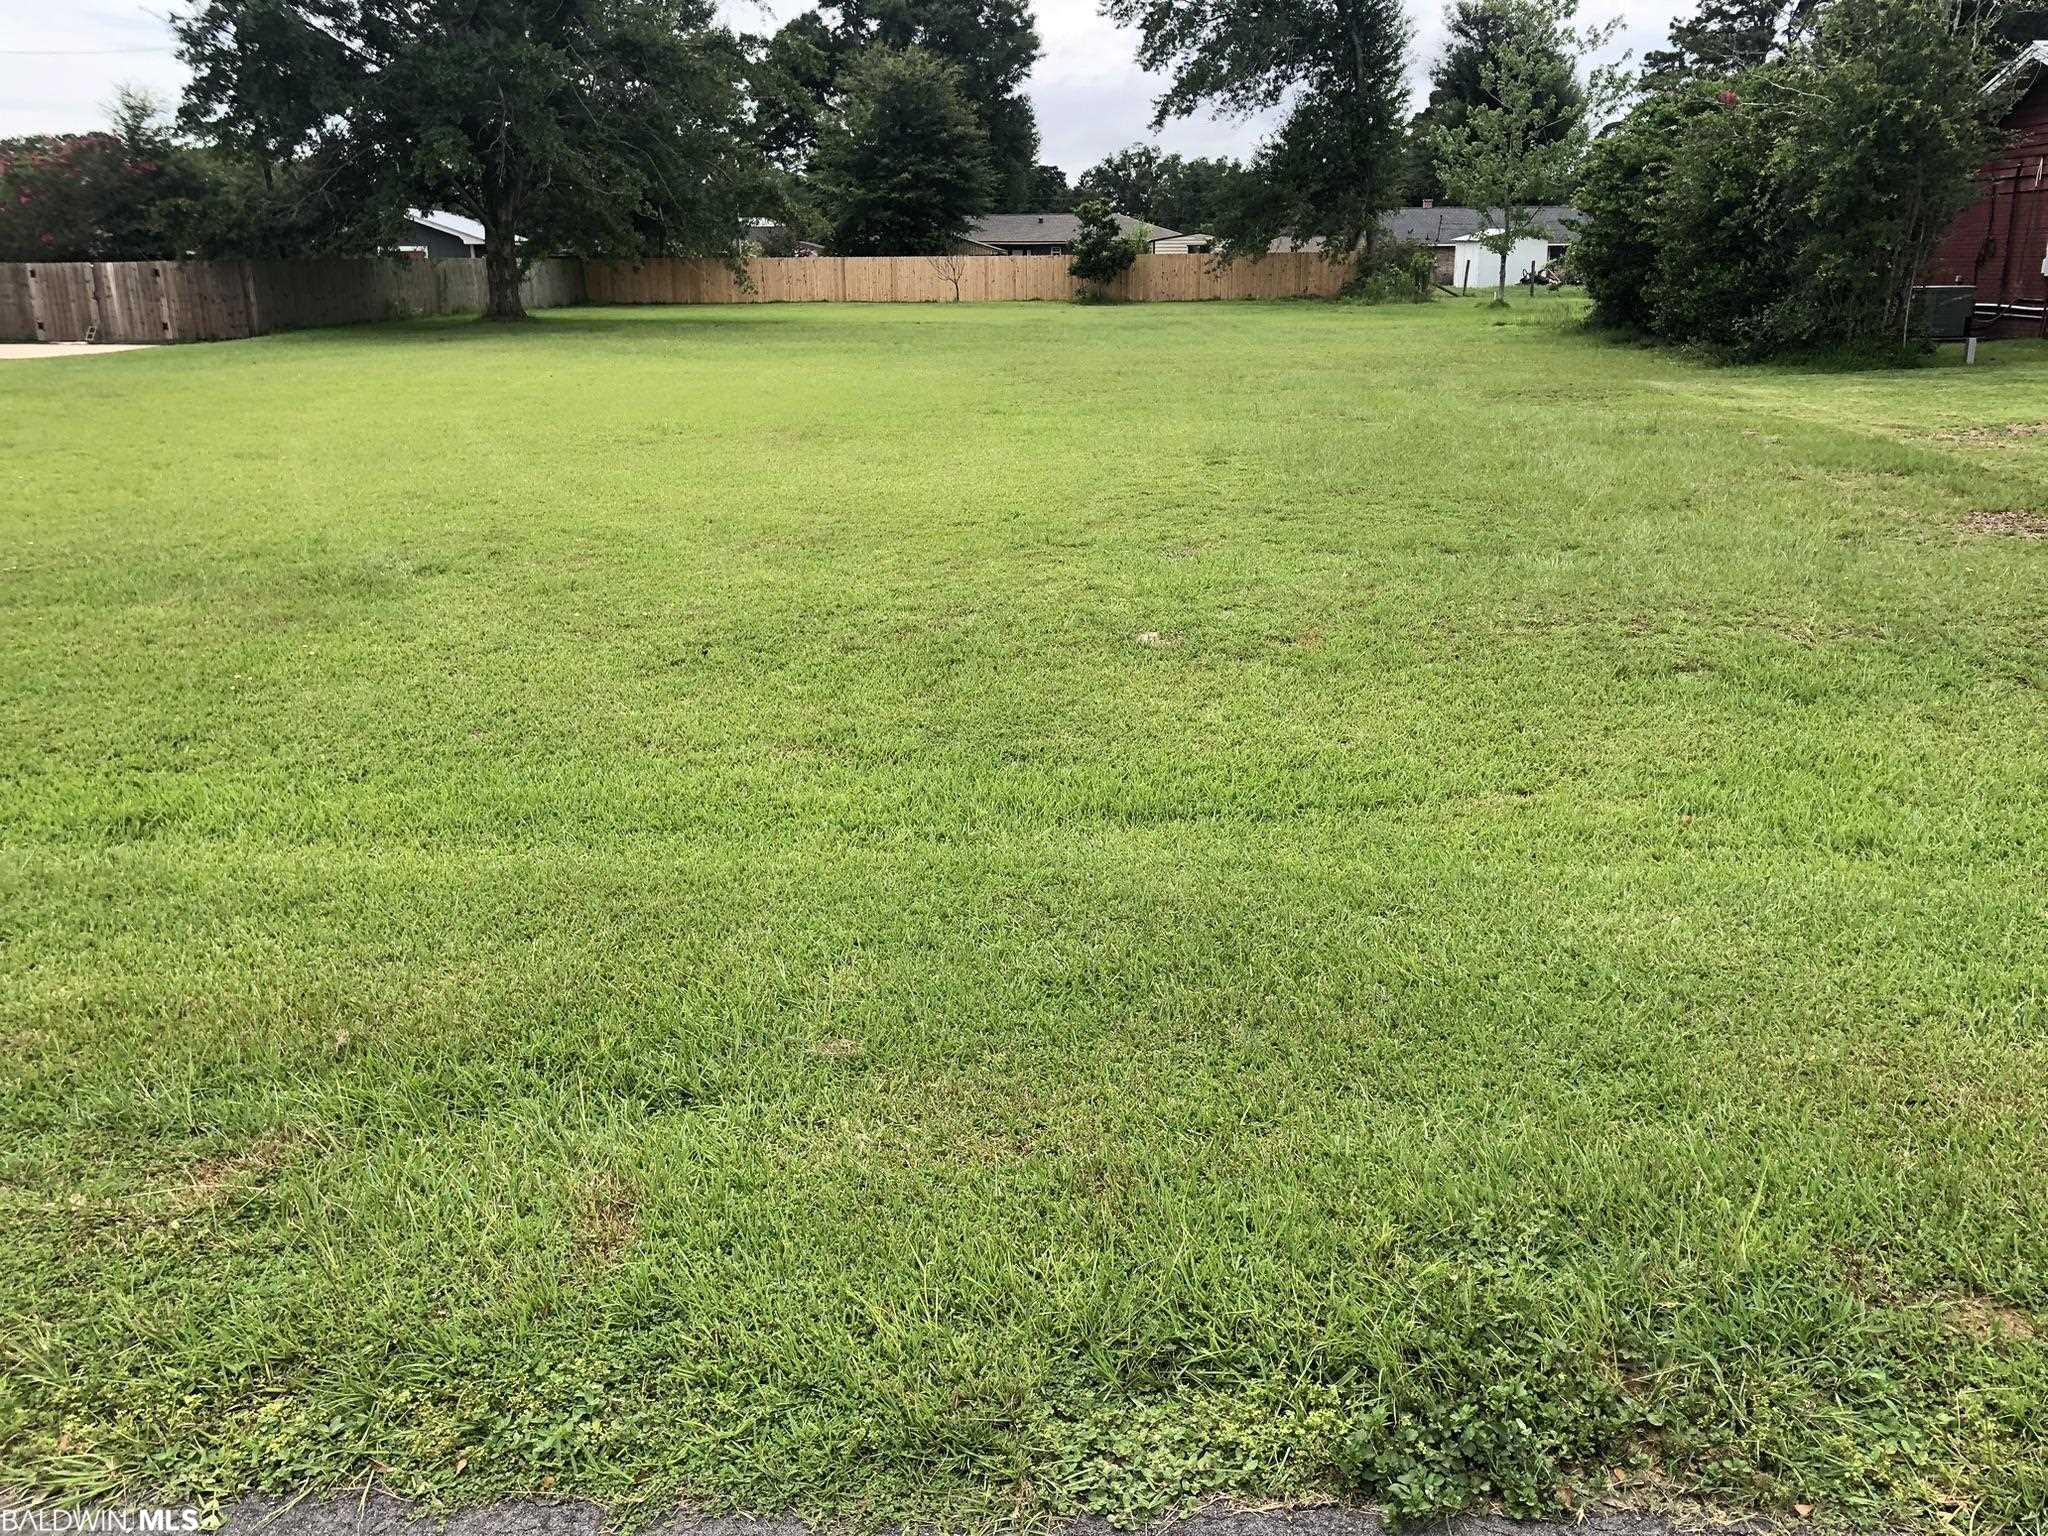 Boat lovers!!! This vacant lot in the Riverwood Subdivision nestled in Bon Secour is a great location to build your dream home. The lot is a nice level lot giving you the the best of both words, you can build on a high and dry with having access to your  deeded WATERFRONT boat lot on Boggy Branch. Boggy Branch is a deep water creek that flows into the Bon Secour river with unobstructed access to Mobile bay and beyond.The Riverwood Subdivision is made up of larger lots all roughly 100 X 200.  It is located off of county Road 10 on the South Side of Foley, making it convenient to the beaches and dining in Gulf Shores.  It is also convenient to shopping and dining in Foley, Fairhope and other delightful communities around Southern Baldwin County.The Blessing of this community is you are able to choose between going to dinner by car or by boat.  If by Boat you can catch the great sunsets over Mobile Bay on your way either to or from dinner.Come live the boat life!! Call now for your appointment.